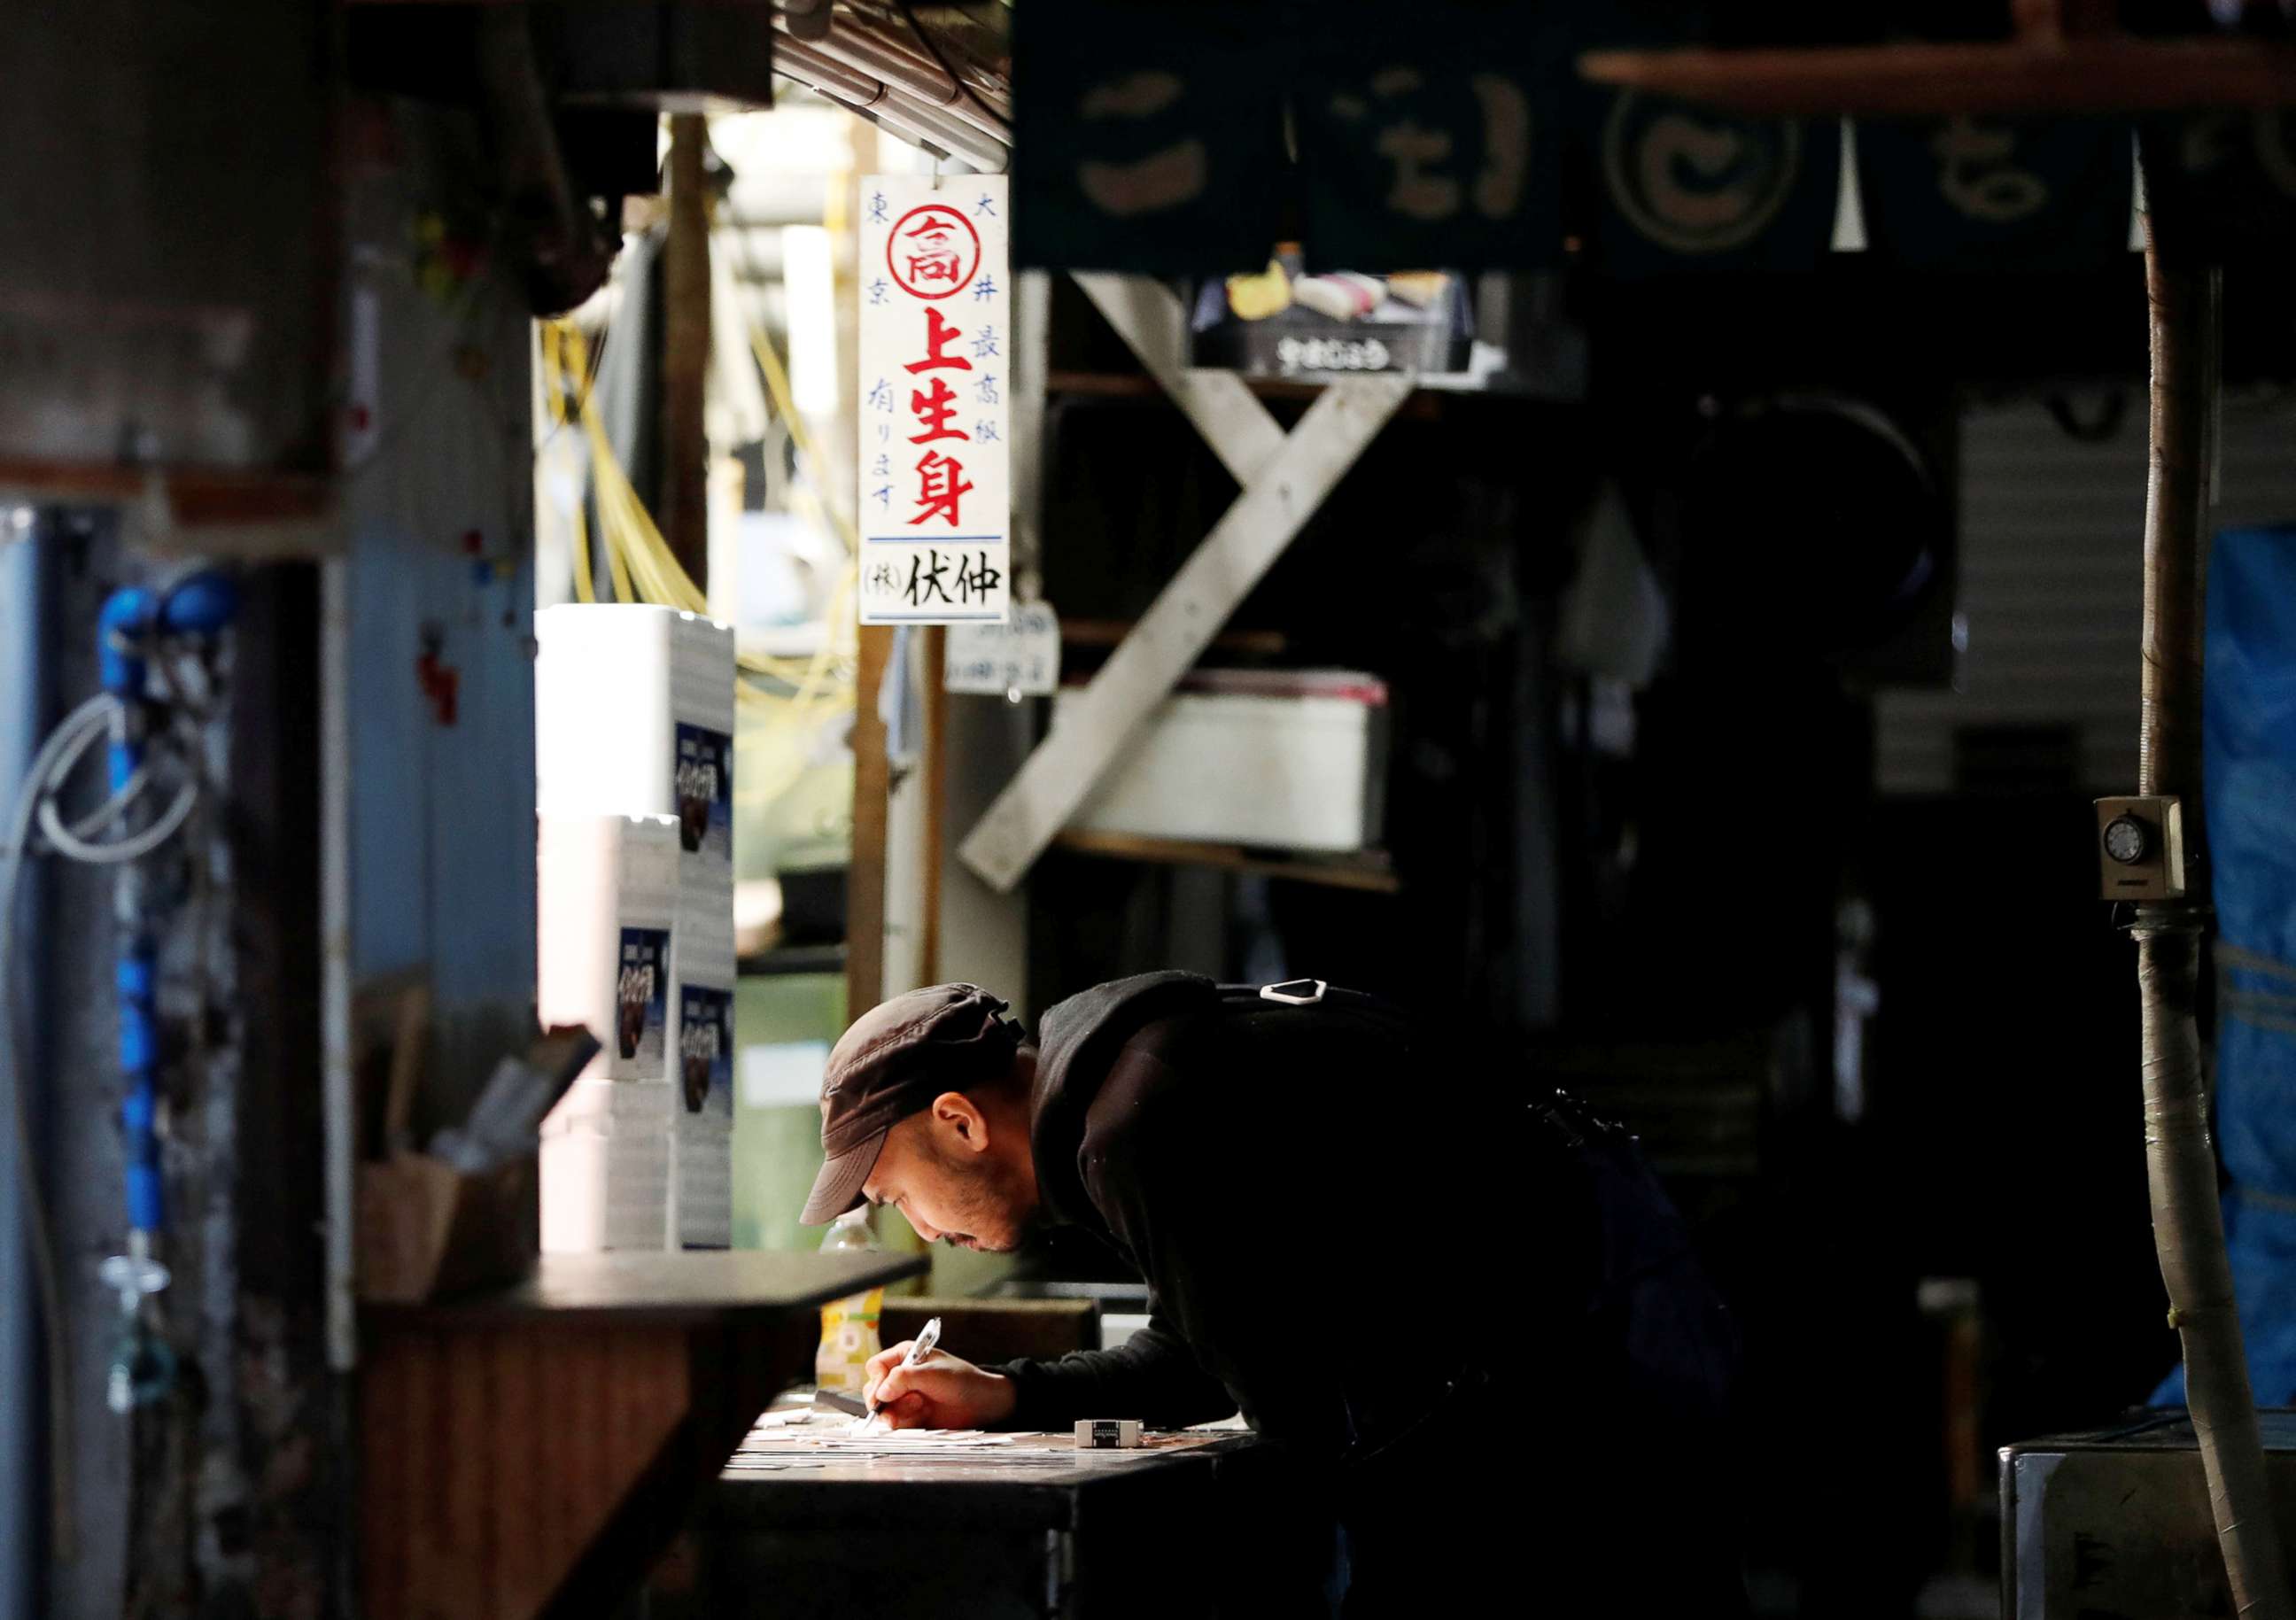 PHOTO: A wholesaler writes the days sales figures after trading ends at the Tsukiji fish market in Tokyo, Sept. 27, 2018.